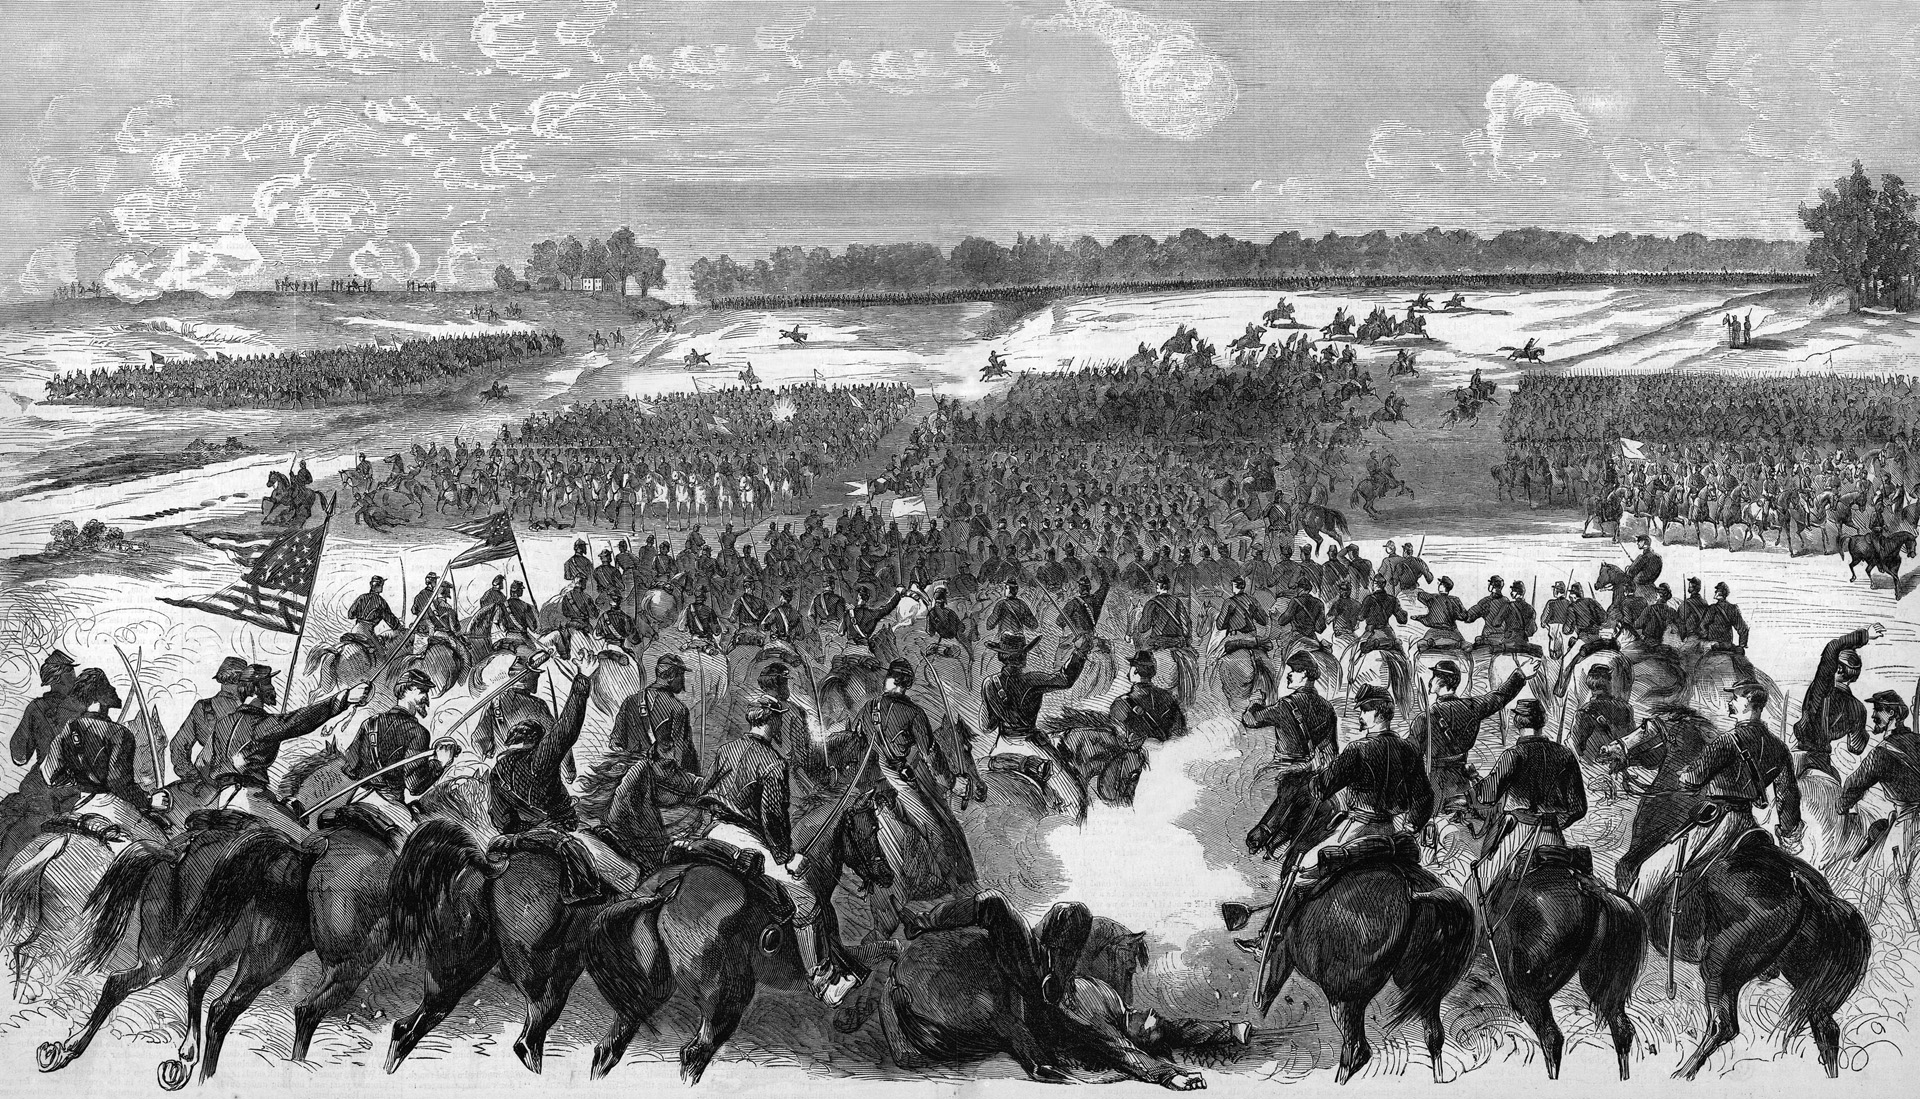 After crossing Beverly Ford before dawn on June 9, 1863, Brig. Gen. John Buford’s reinforced First Division pushed back the Confederate left flank more than a mile.